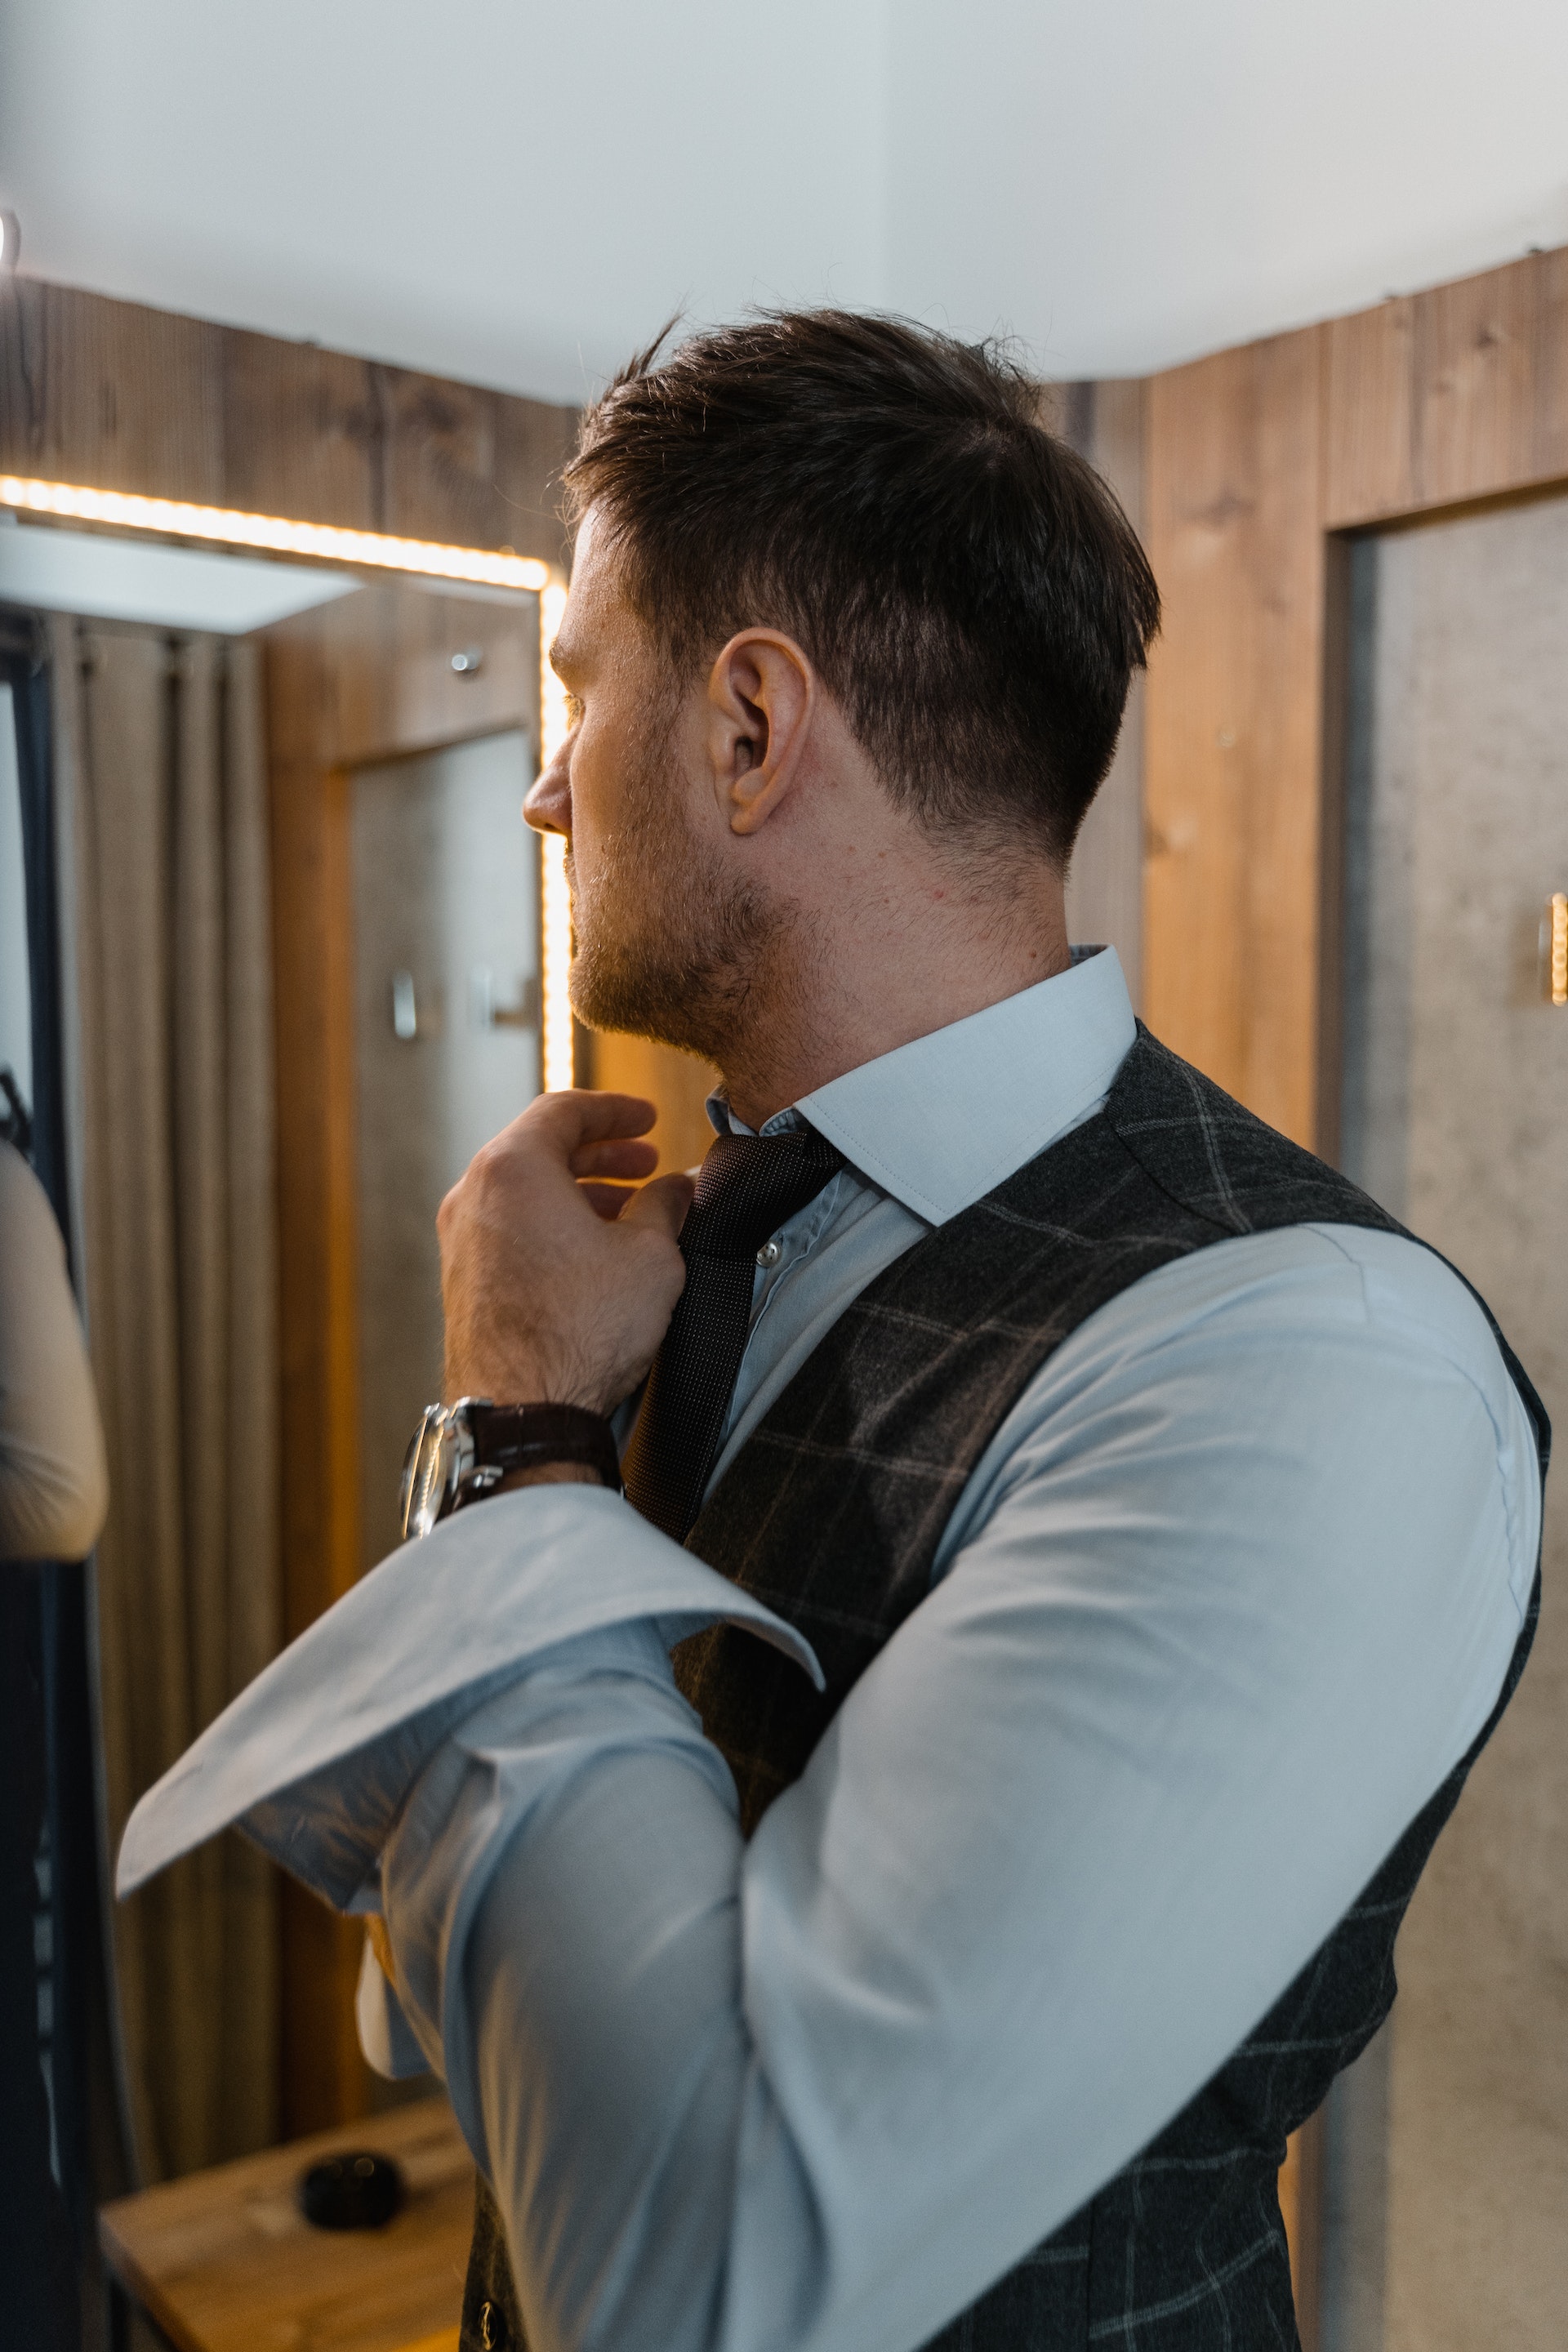 A man looking at himself in the mirror | Source: Pexels